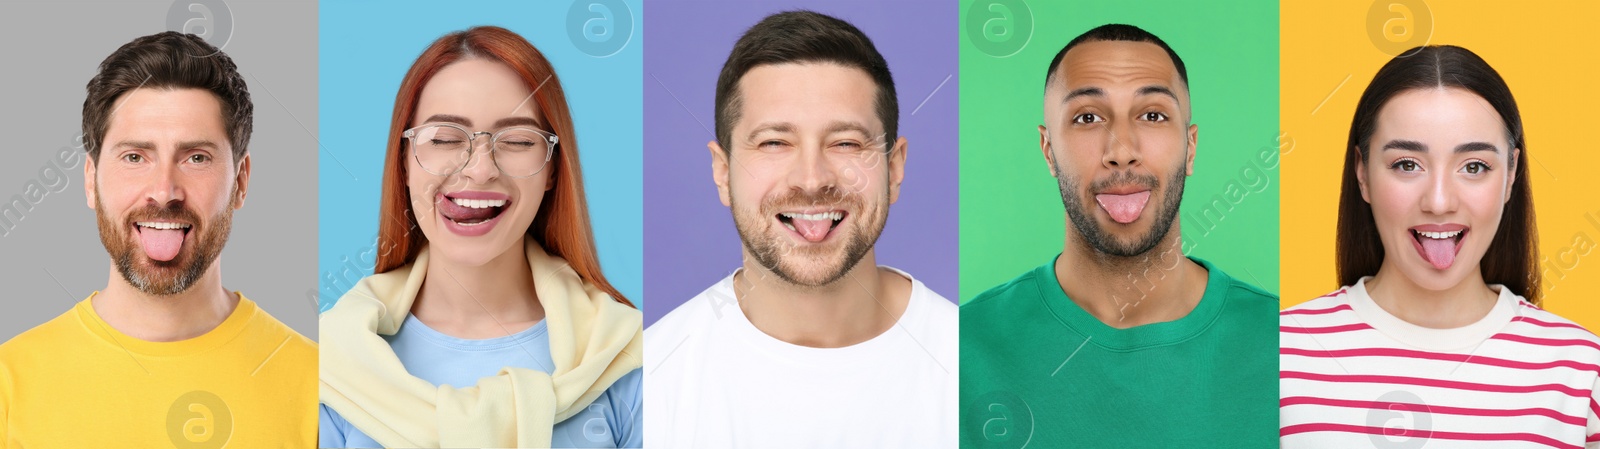 Image of Collage with photos of people showing their tongues on different color backgrounds